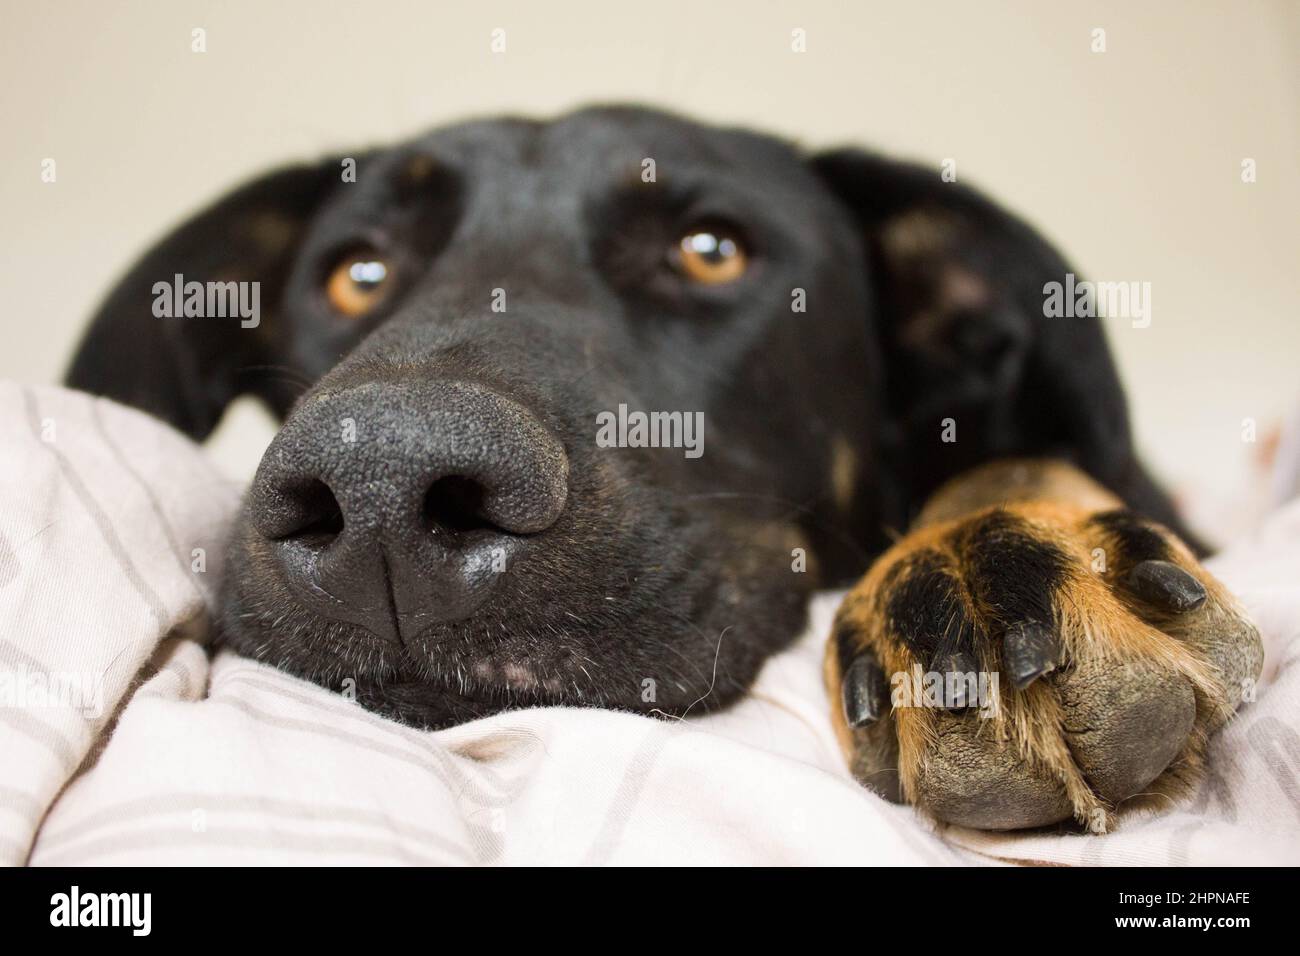 Black dog with a brown paw and brow eyes lying on the bed, looking very tired. Big brown and black dog paw in the focus. Stock Photo